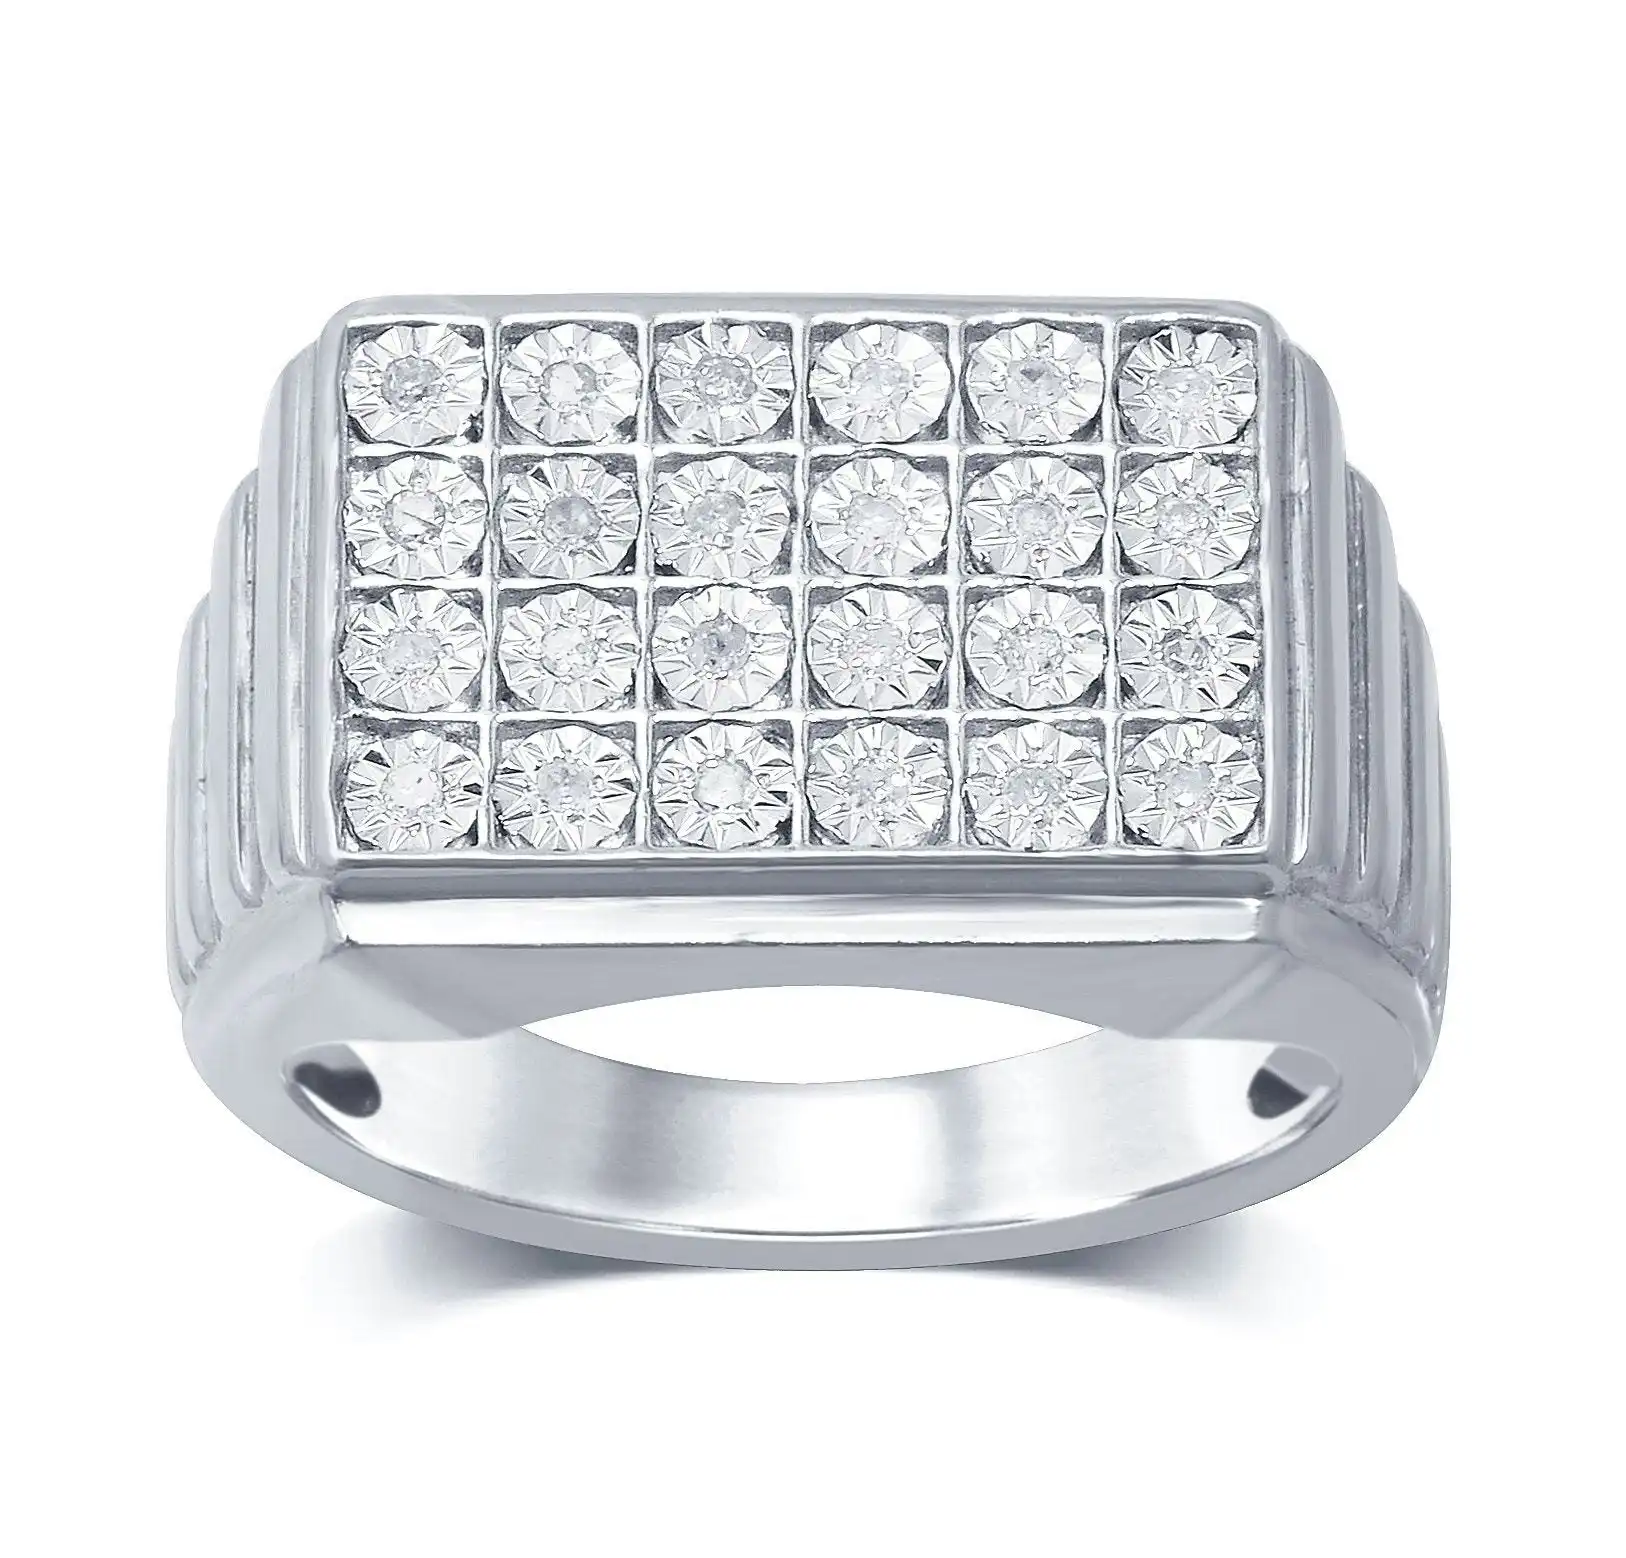 Tablet Men's Ring with 0.15ct of Diamonds in Sterling Silver